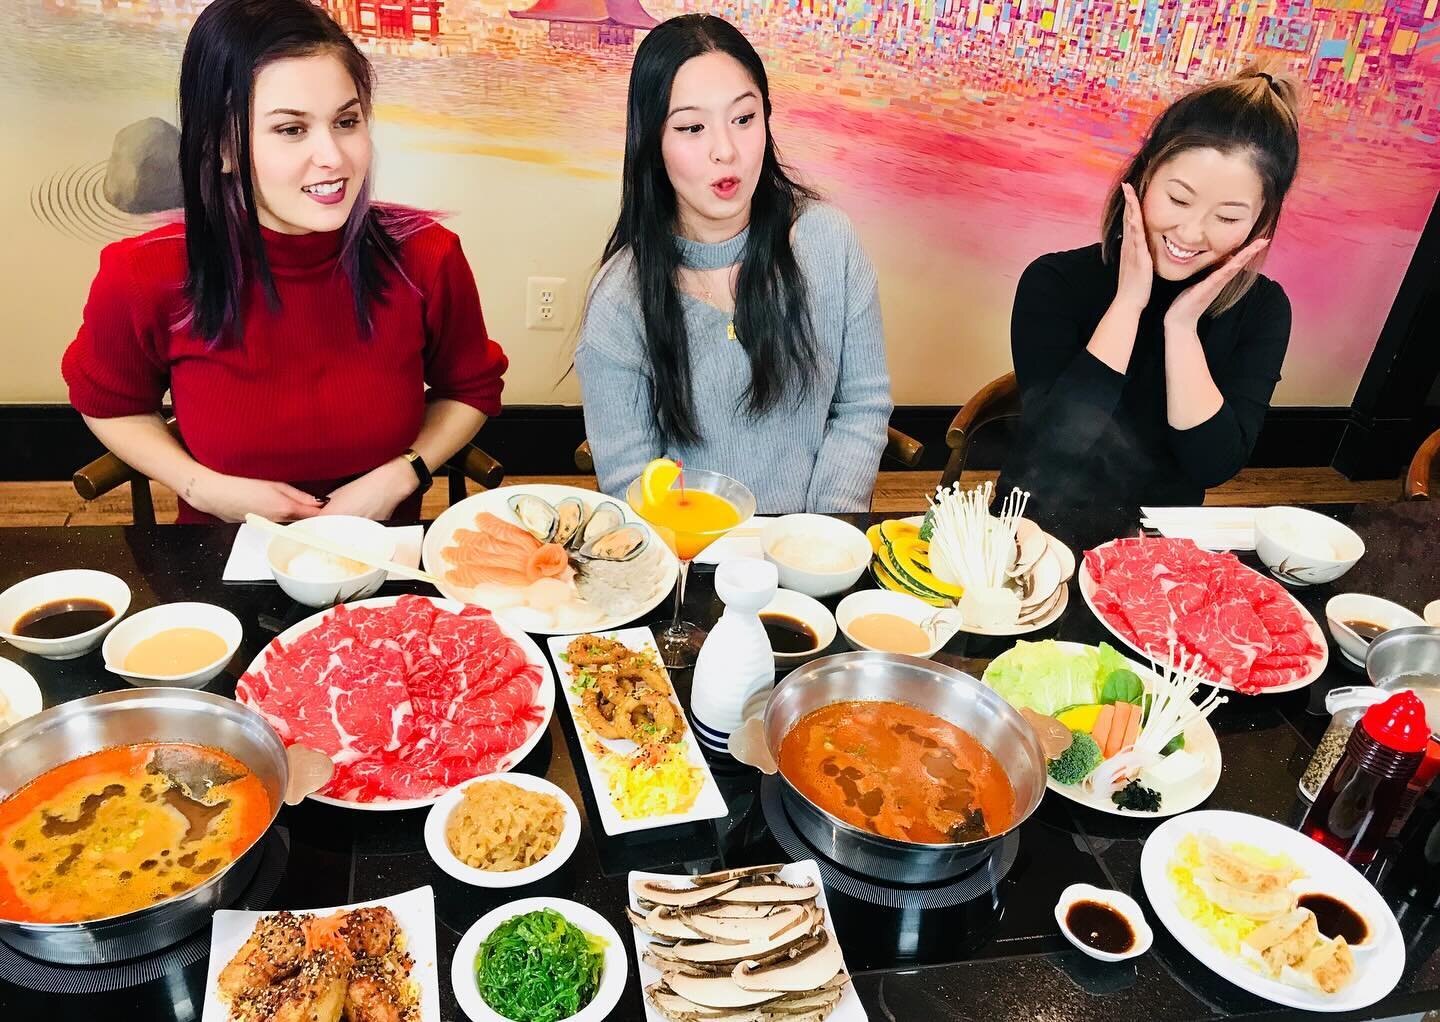 🎉 It's Shabu Shabu Time! 🍜💃🕺 Bring your besties and join the weekend party at California Shabu Shabu! Dive into our sizzling hot pots, laugh over delicious bites, and create joyous memories. Let's turn this weekend into a Shabu Shabu fiesta! 🌈🥢